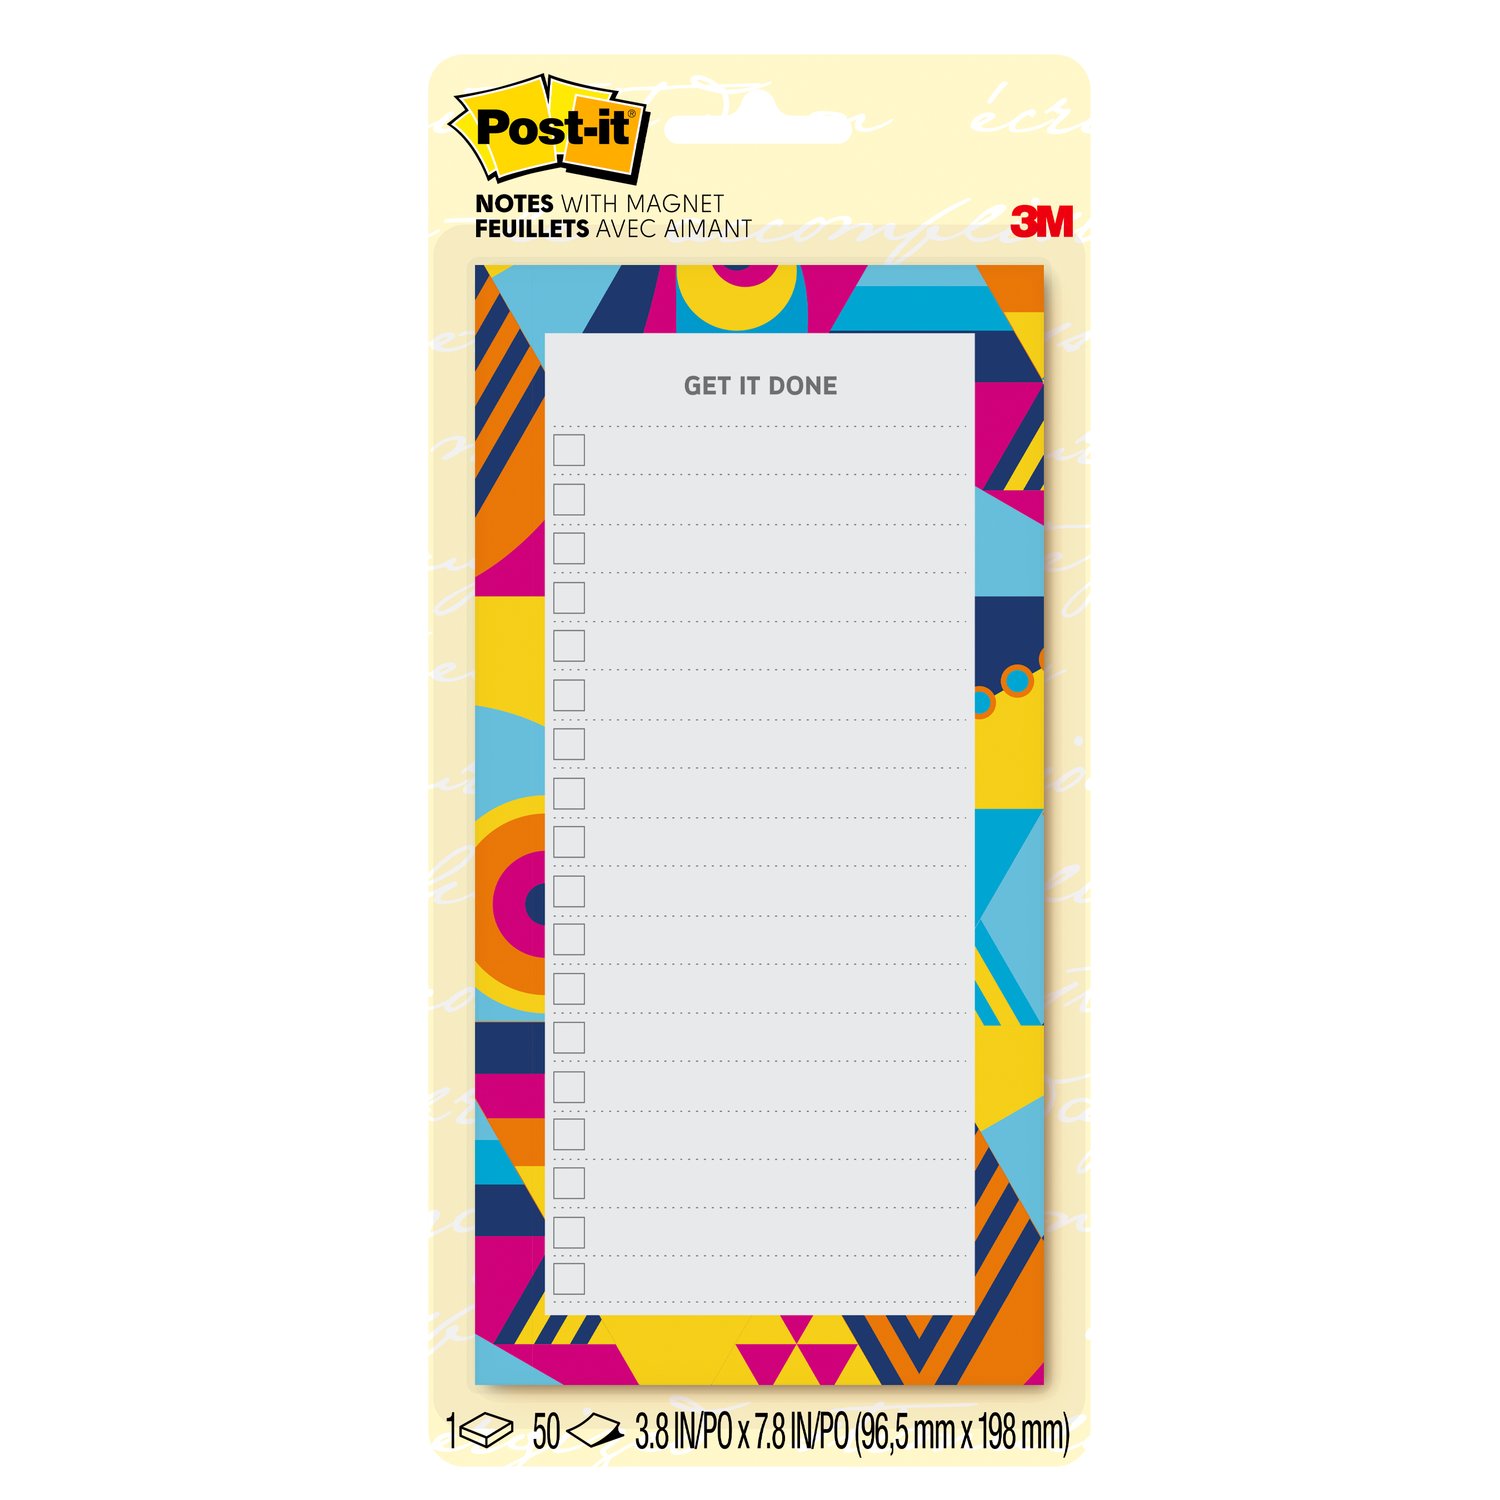 7100194340 - Post-it Notes BC-LIST-OBRT, 3.8 in x 7.8 in (96.5 mm x 198 mm)